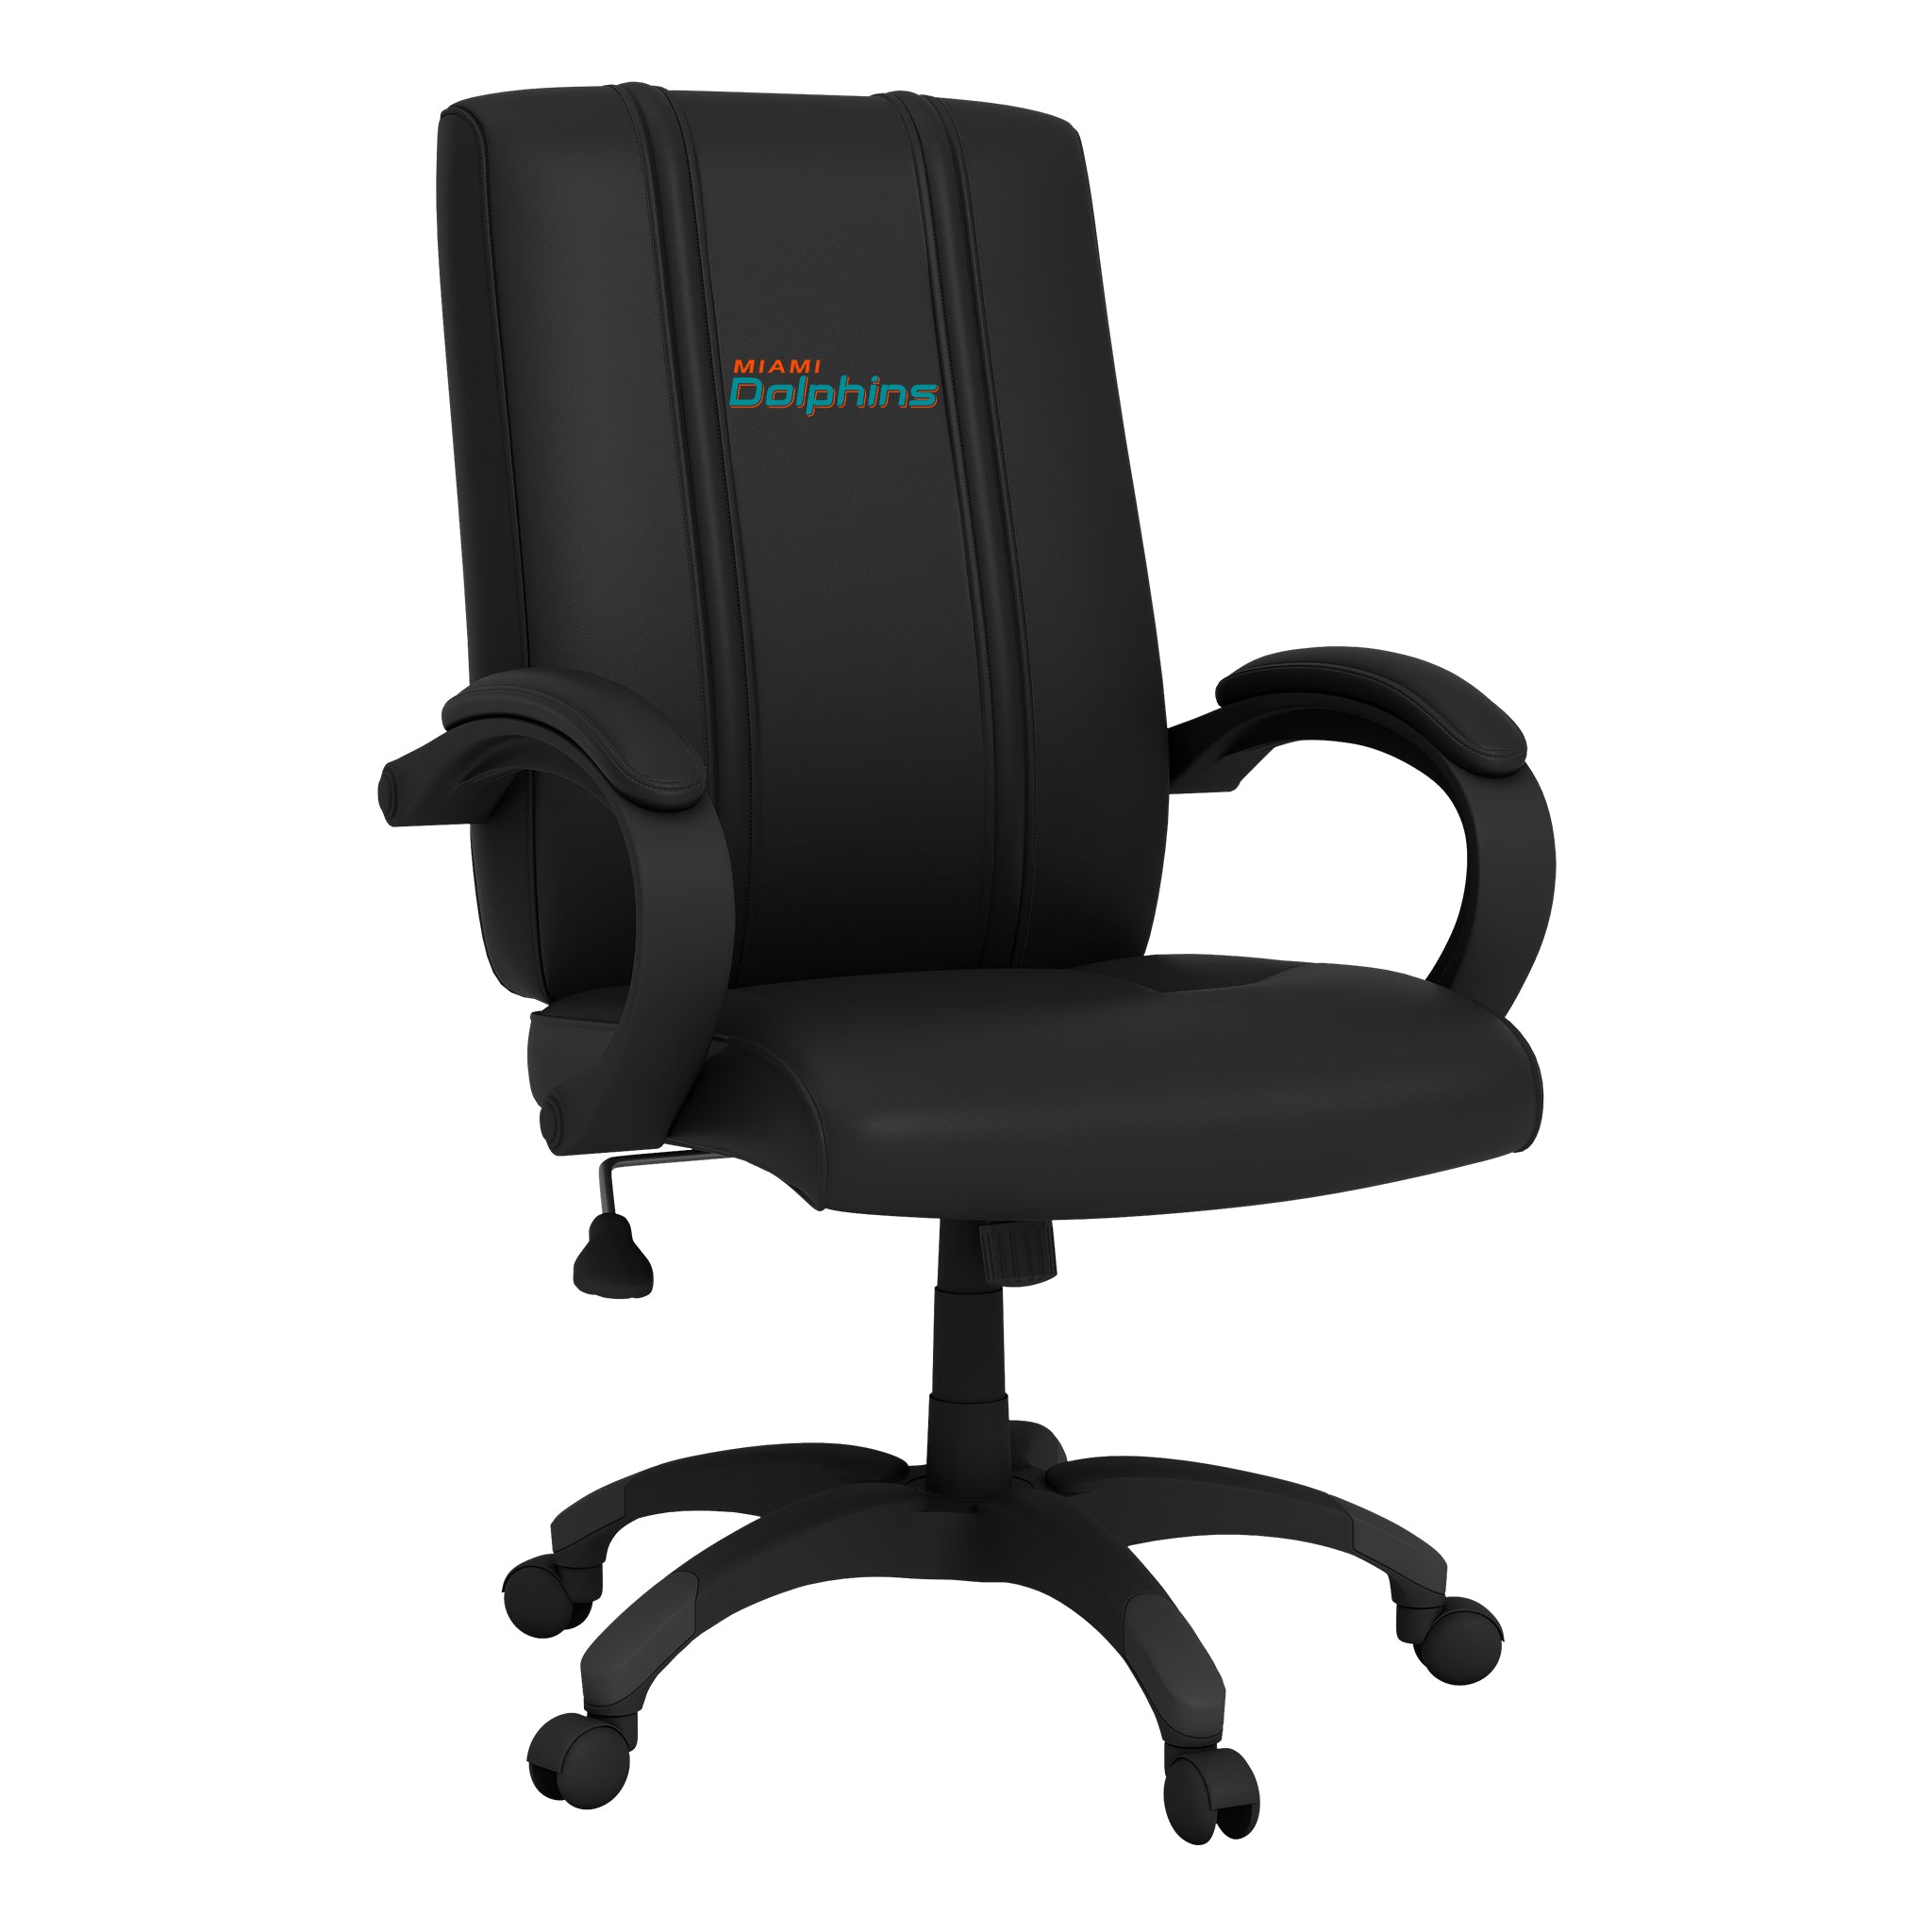 Miami Dolphins Office Chair 1000